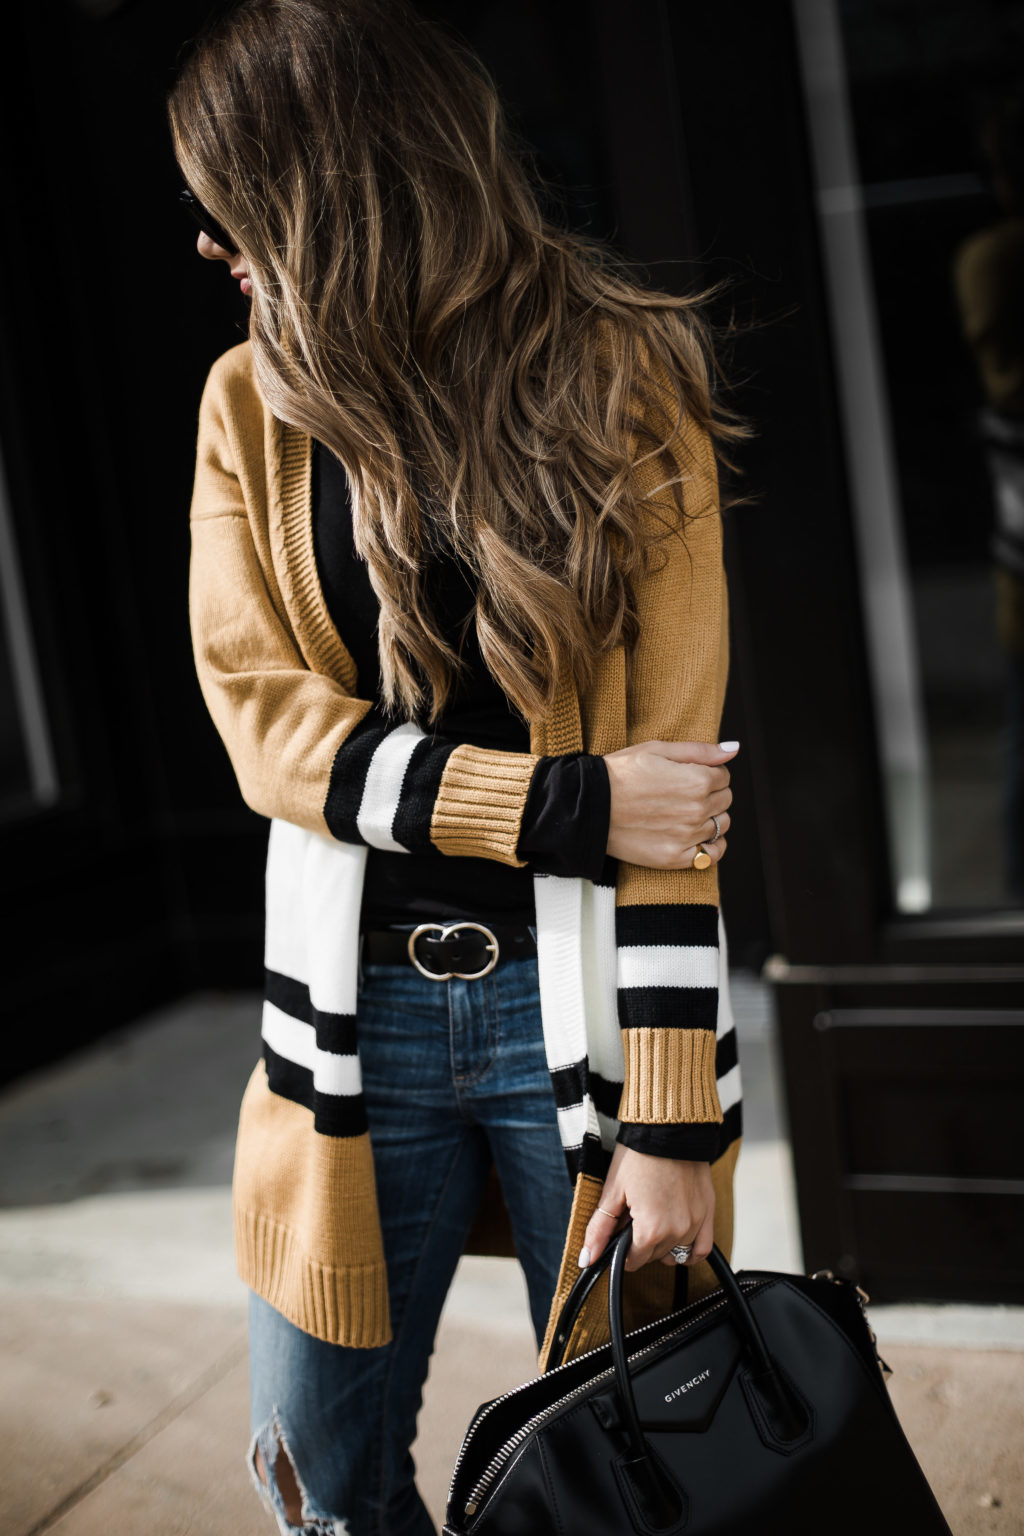 Girl on a Budget: The Striped Cardigan Under $25